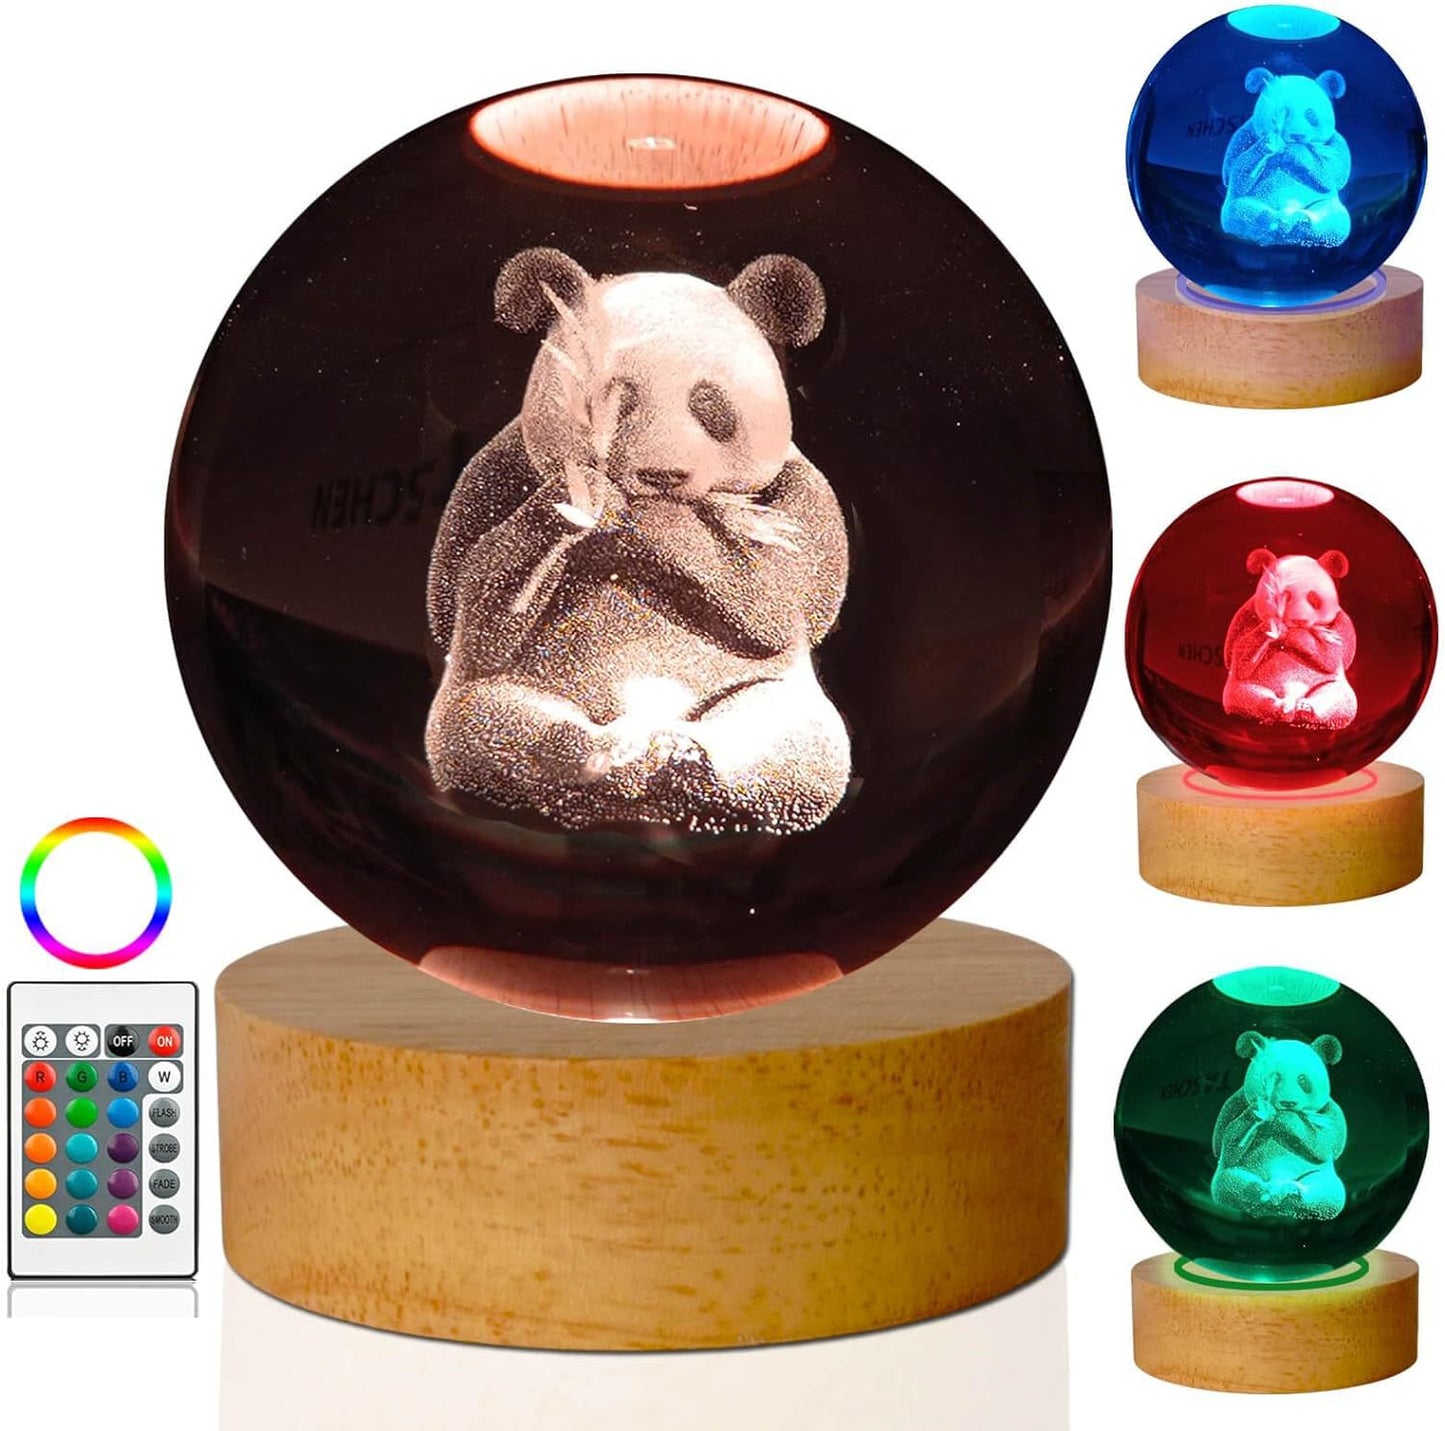 Glowing 3D solar system crystal ball Size: 6cm crystal ball, 8cm crystal ball